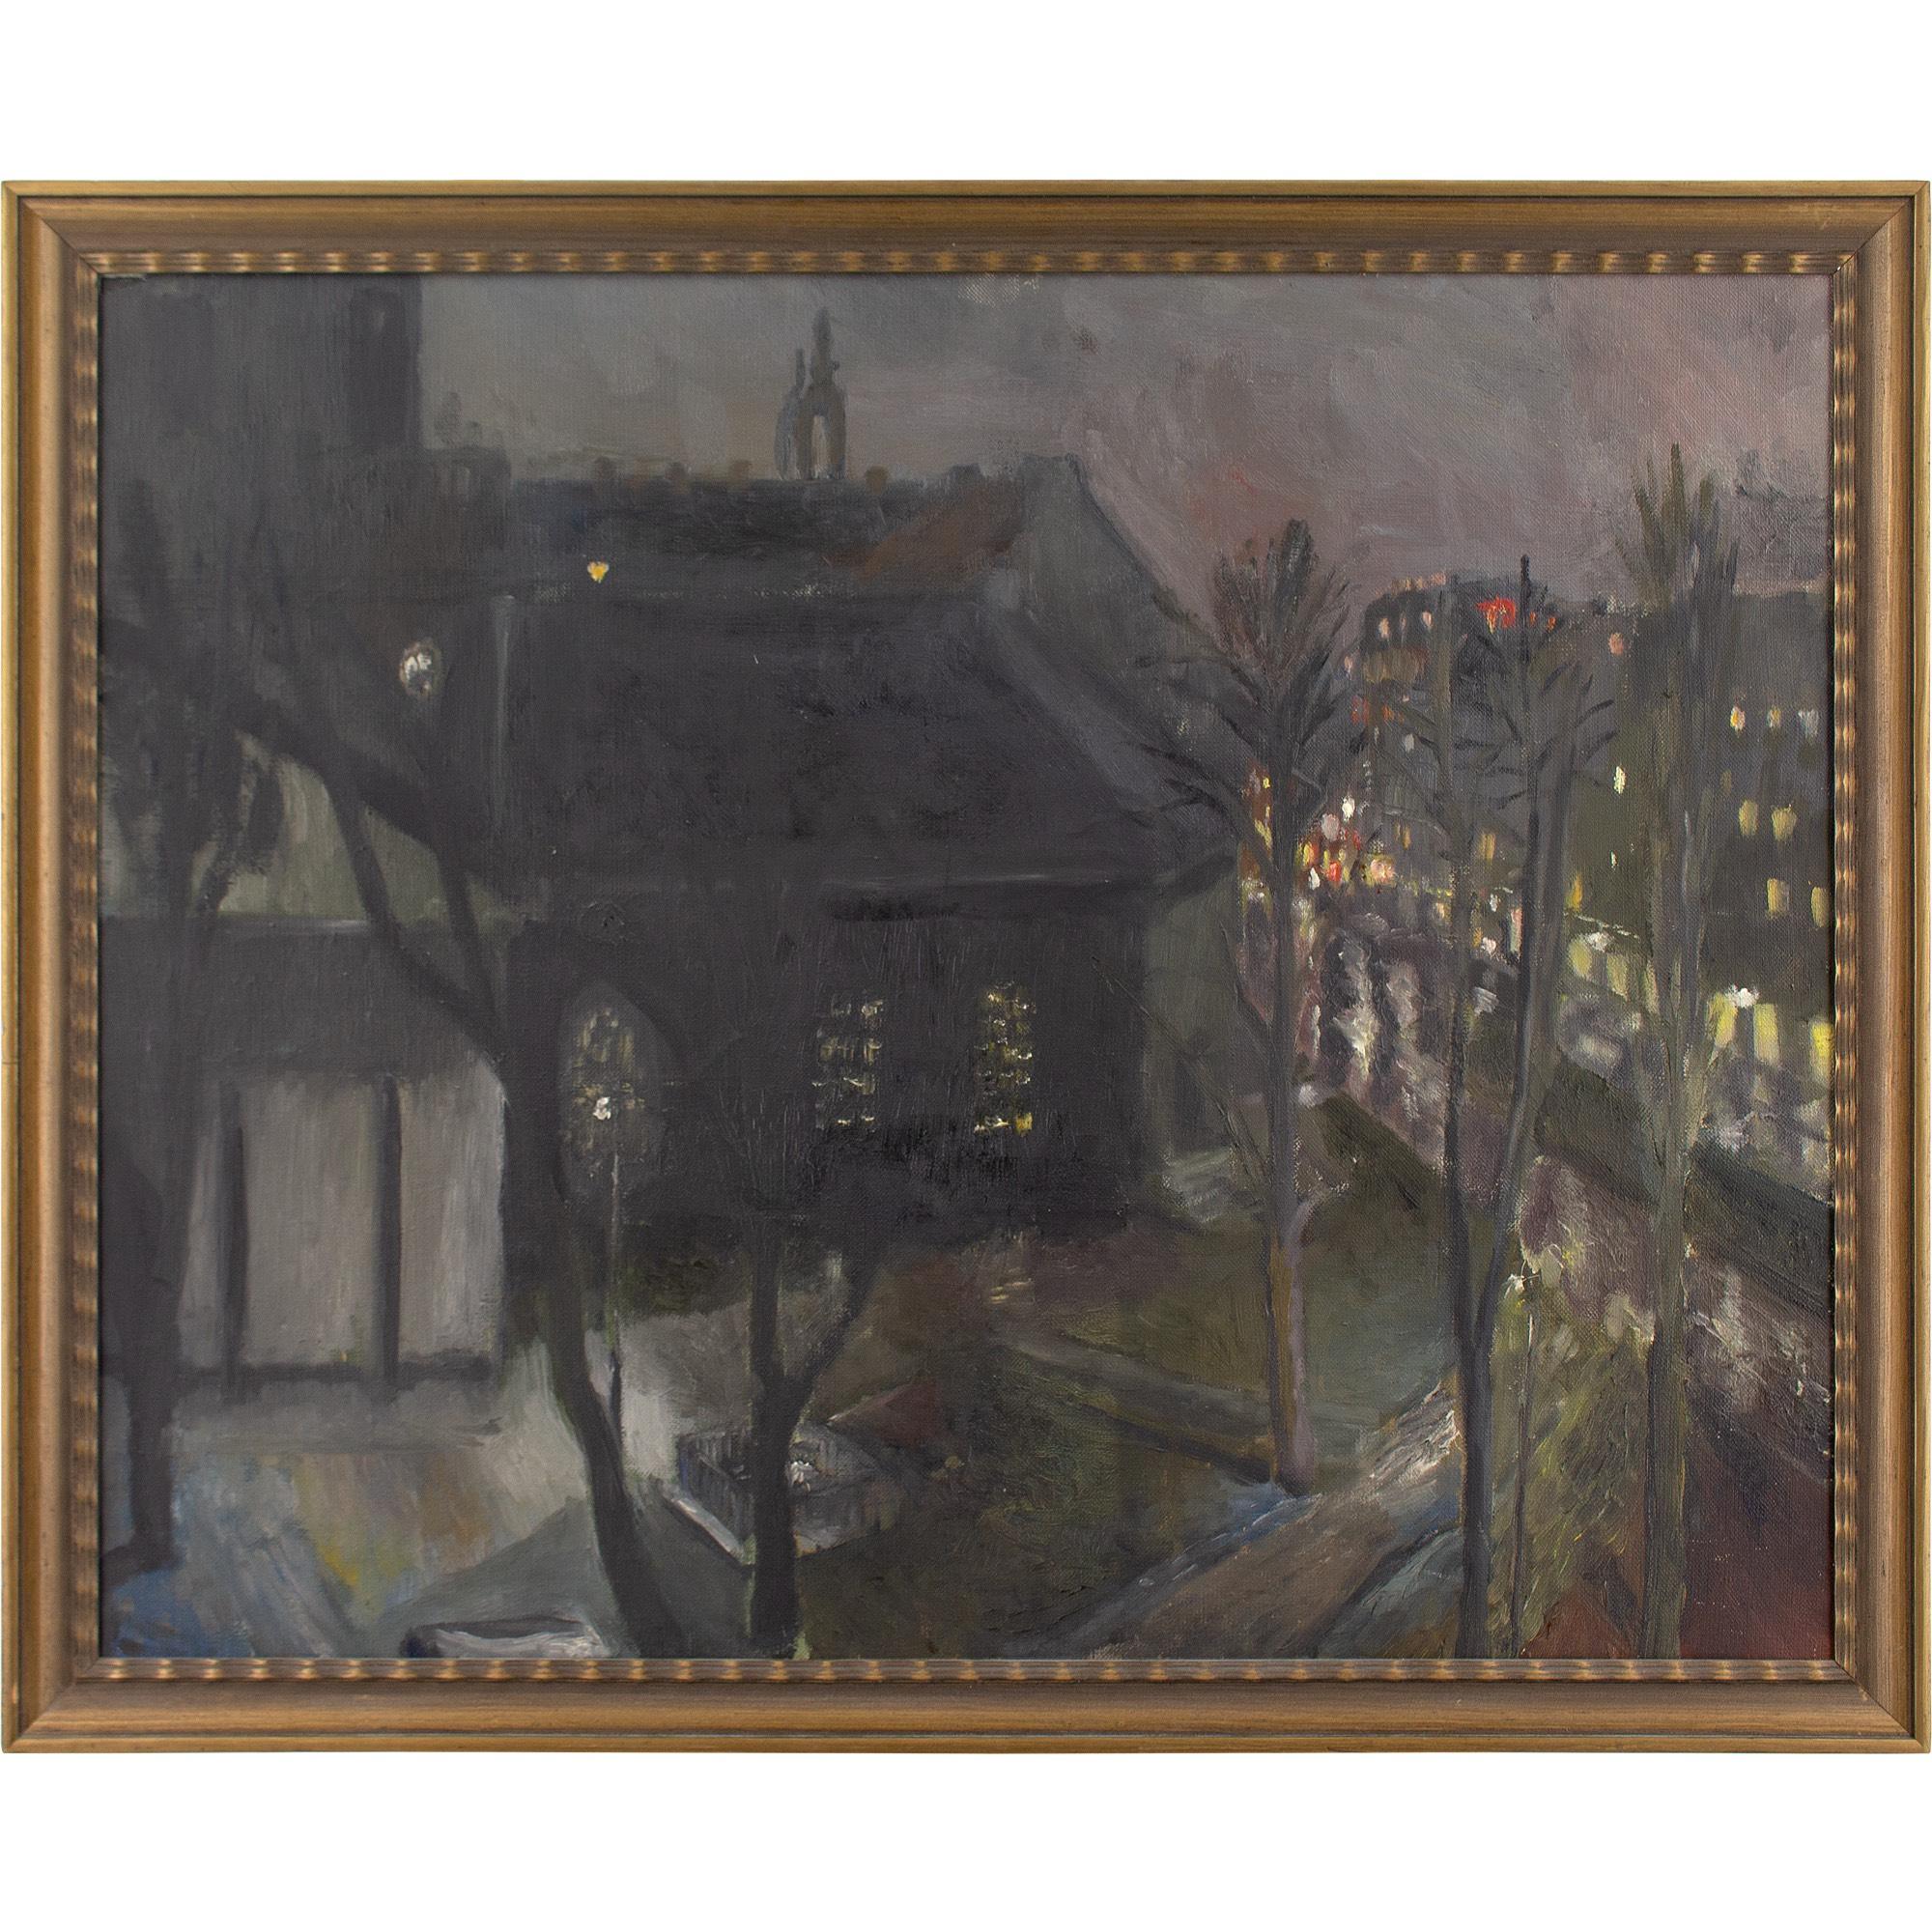 This mid-20th-century nocturne by Swedish artist Lennart Jacobson depicts an elevated urban view, perhaps in Stockholm.

The title ‘April Evening’ suggests a tranquil landscape bathed in the final embers of a broad sunset. Daubs of flora, distant